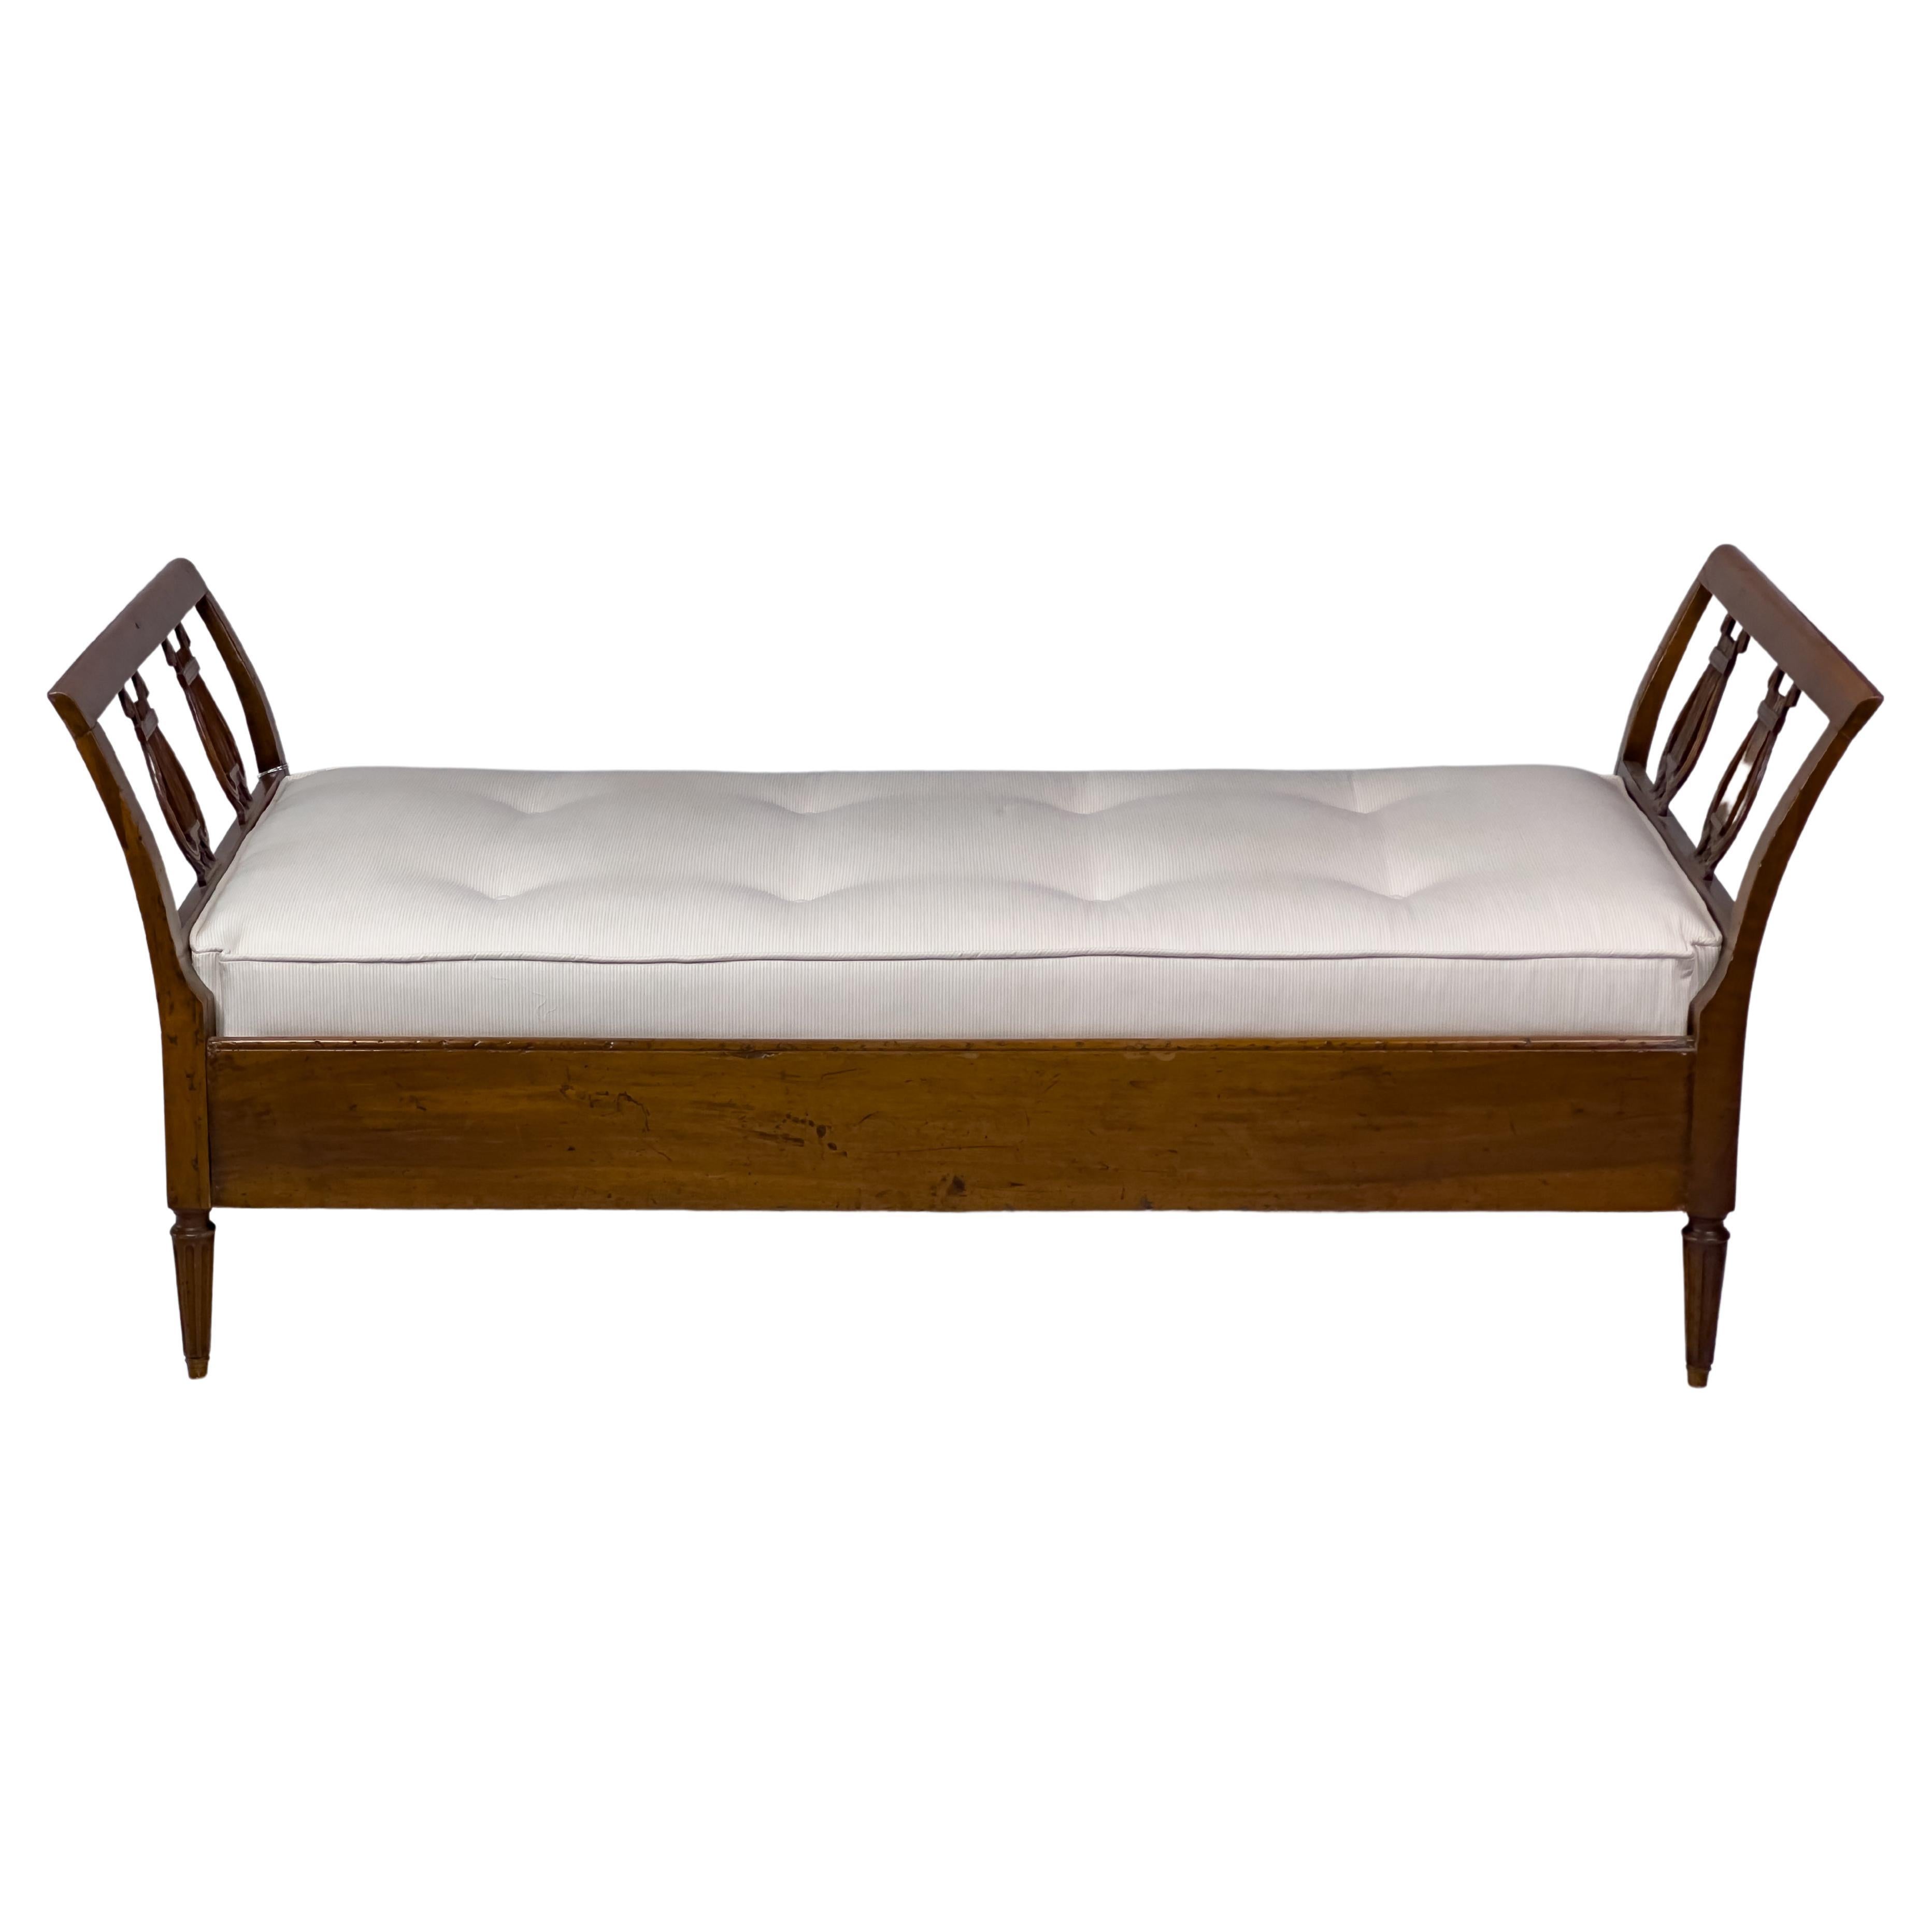 19th c. French Daybed